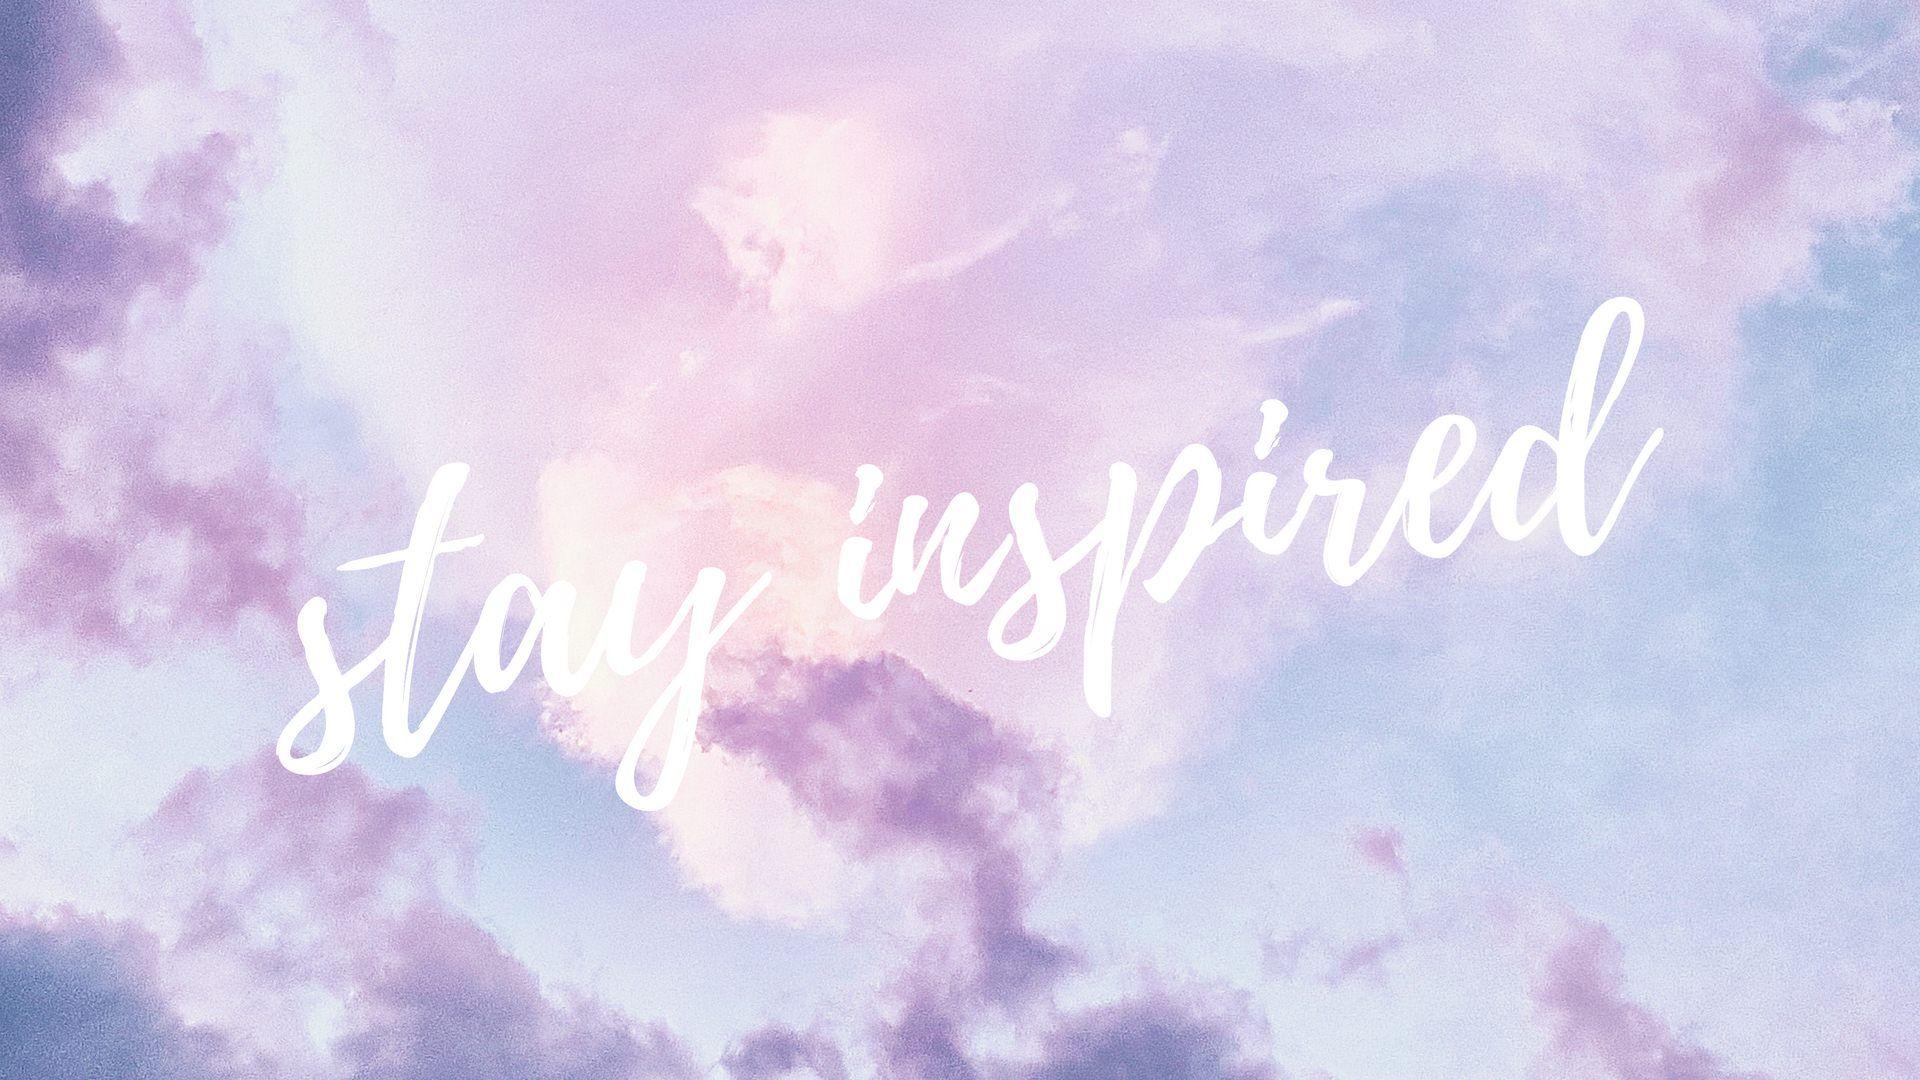 Download These 3 Inspiring Wallpaper for Free